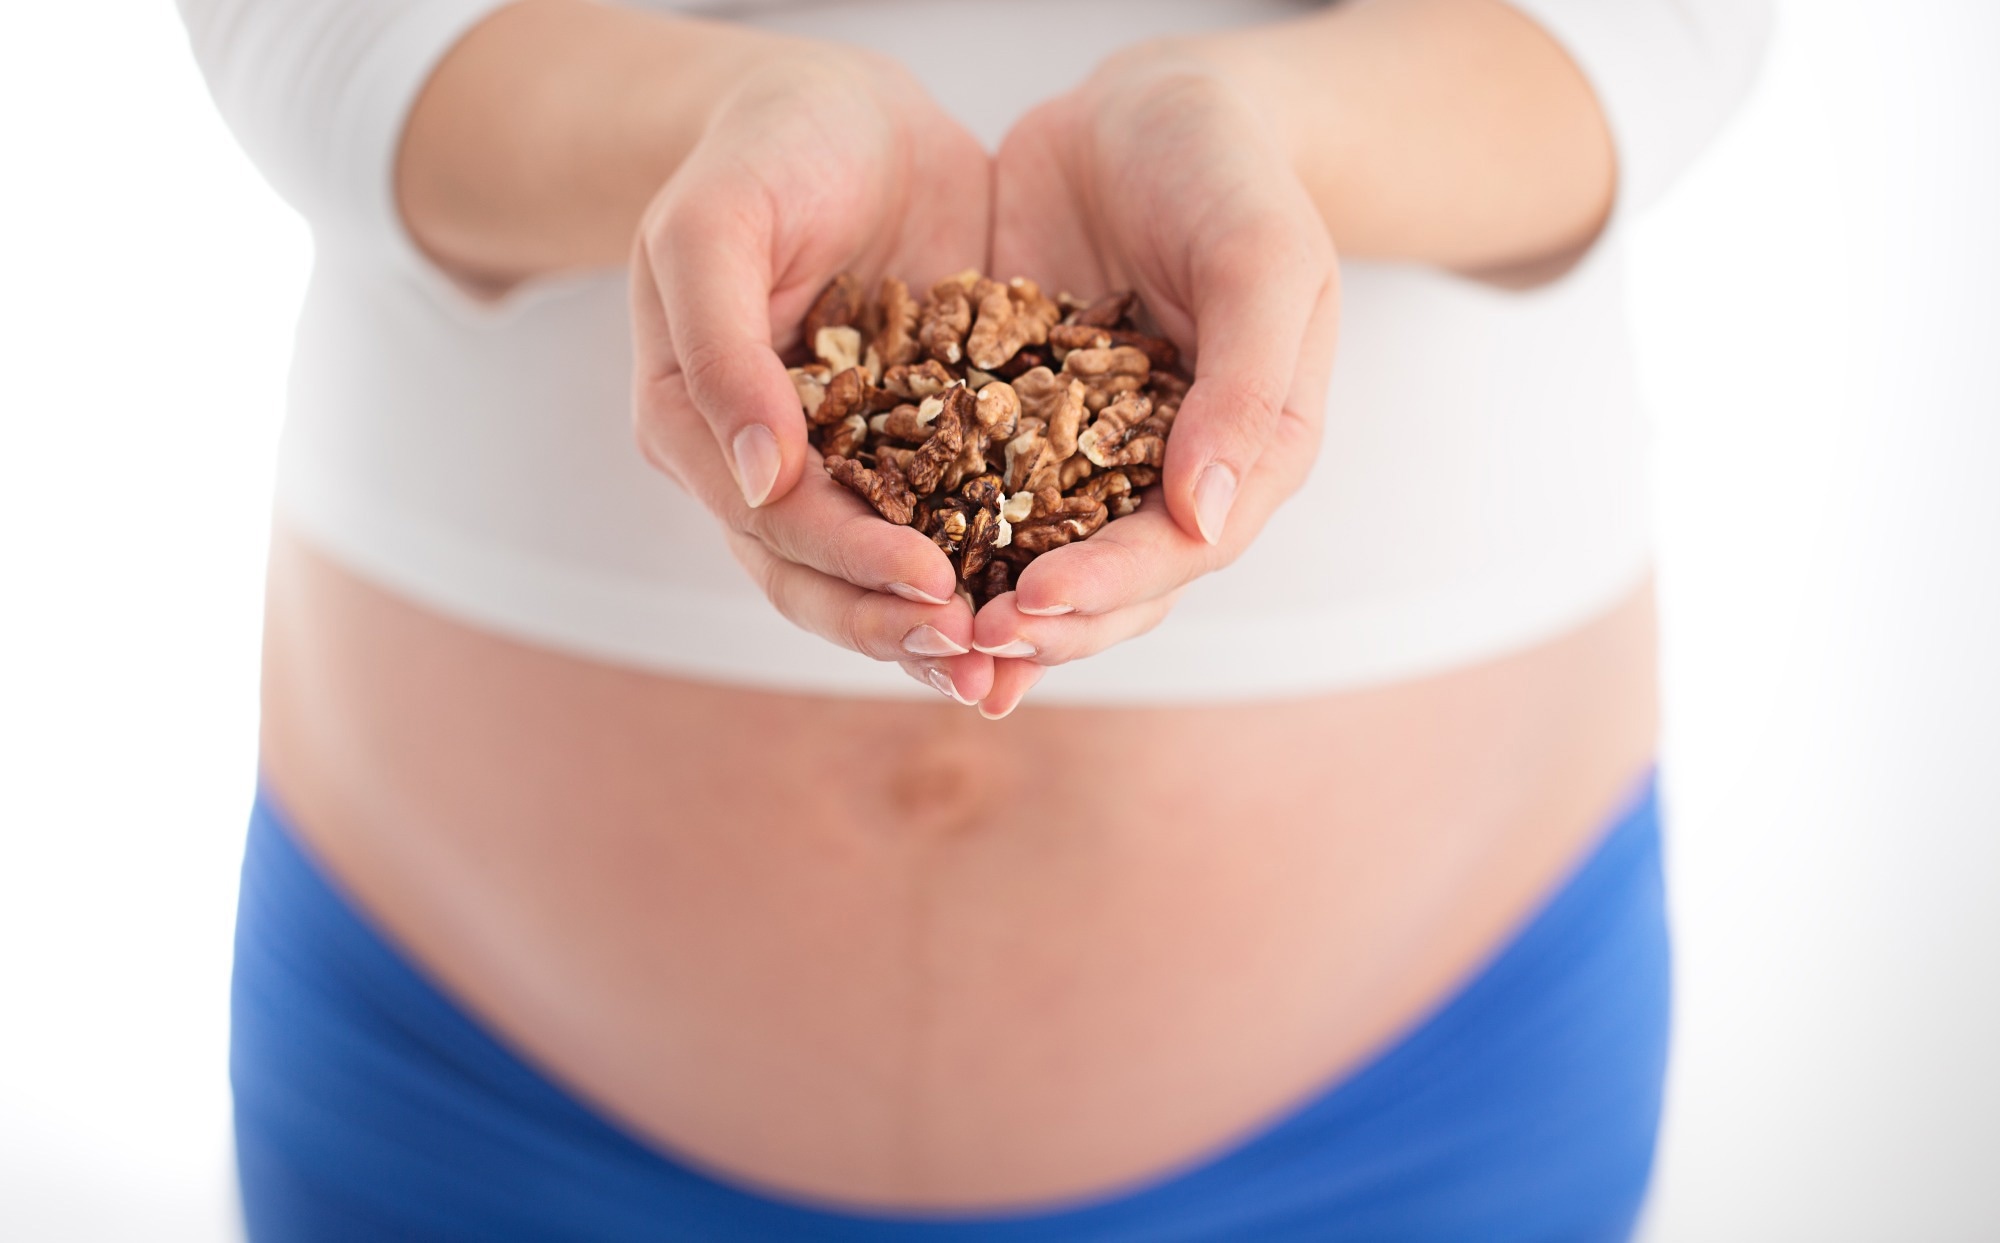 Study: Nut consumption during pregnancy is associated with decreased risk of peer problems in 5-year-old Japanese children. Image Credit: Valentin Valkov / Shutterstock